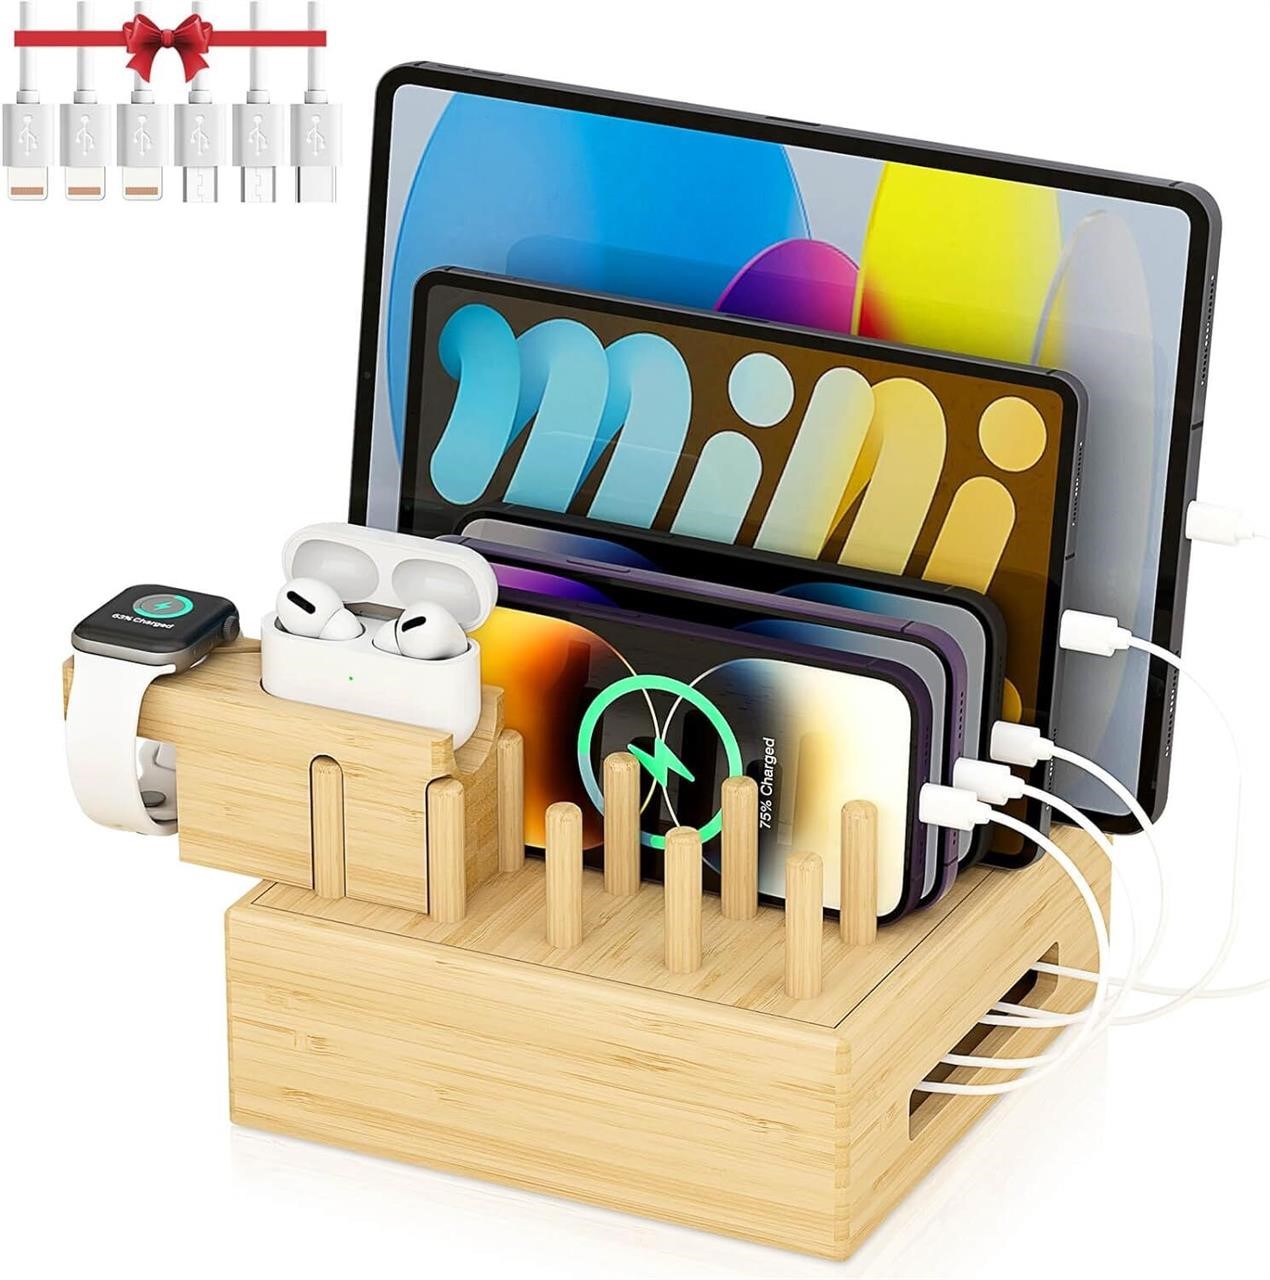 $50  Bamboo Charging Station  7 Ports  Watch Stand